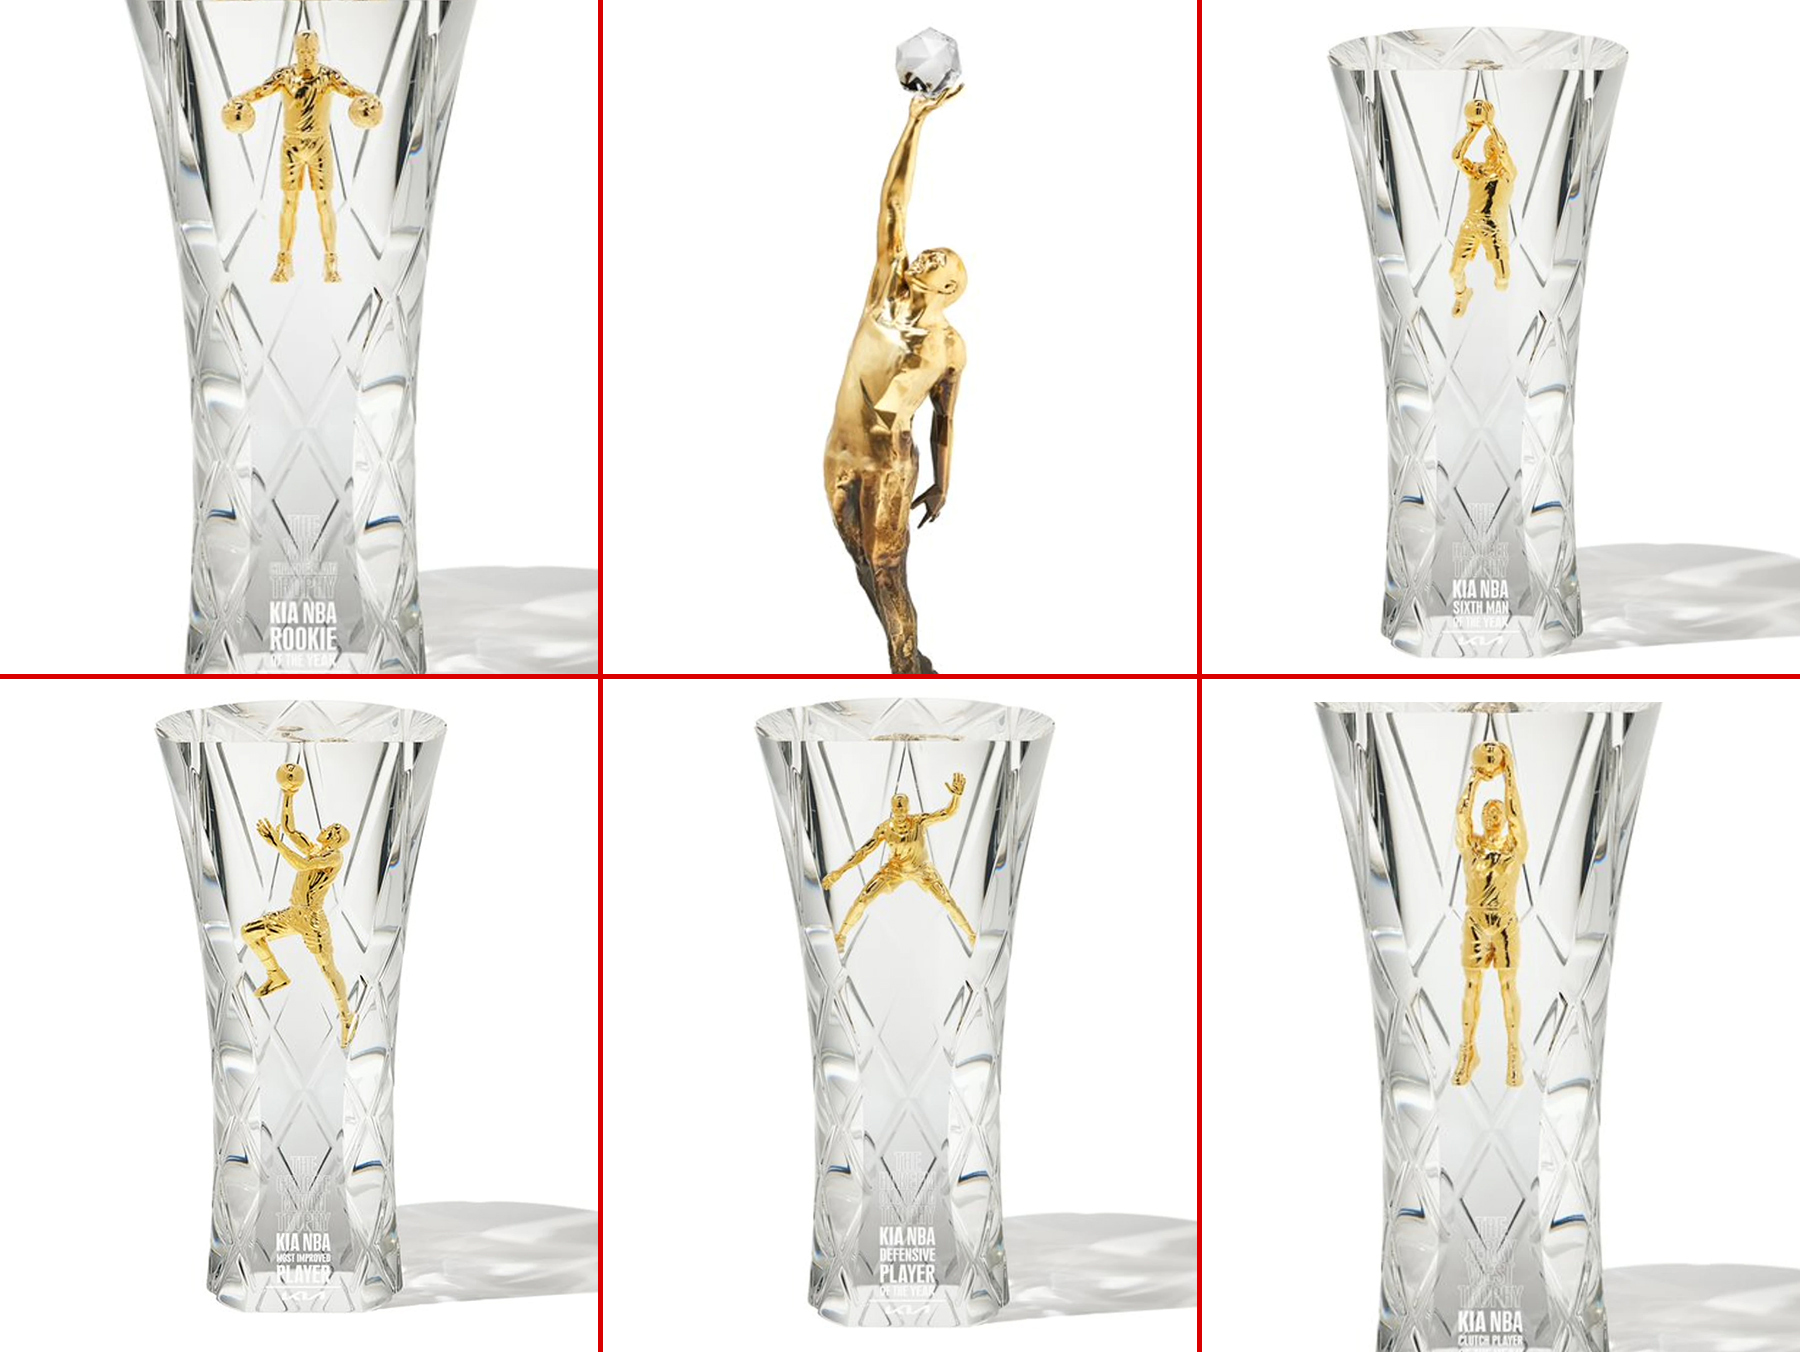 NBA unveils new trophies for division winners named after 6 NBA legends